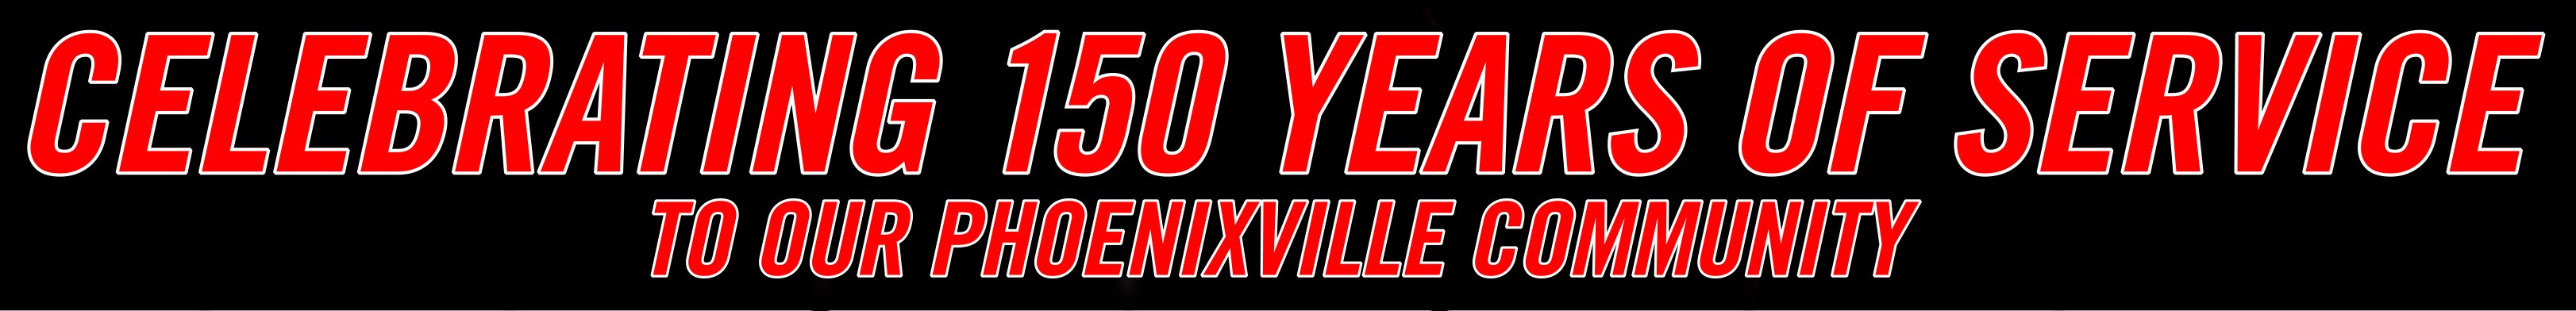 Celebrating 150 Years of Service to our Phoenixville Community